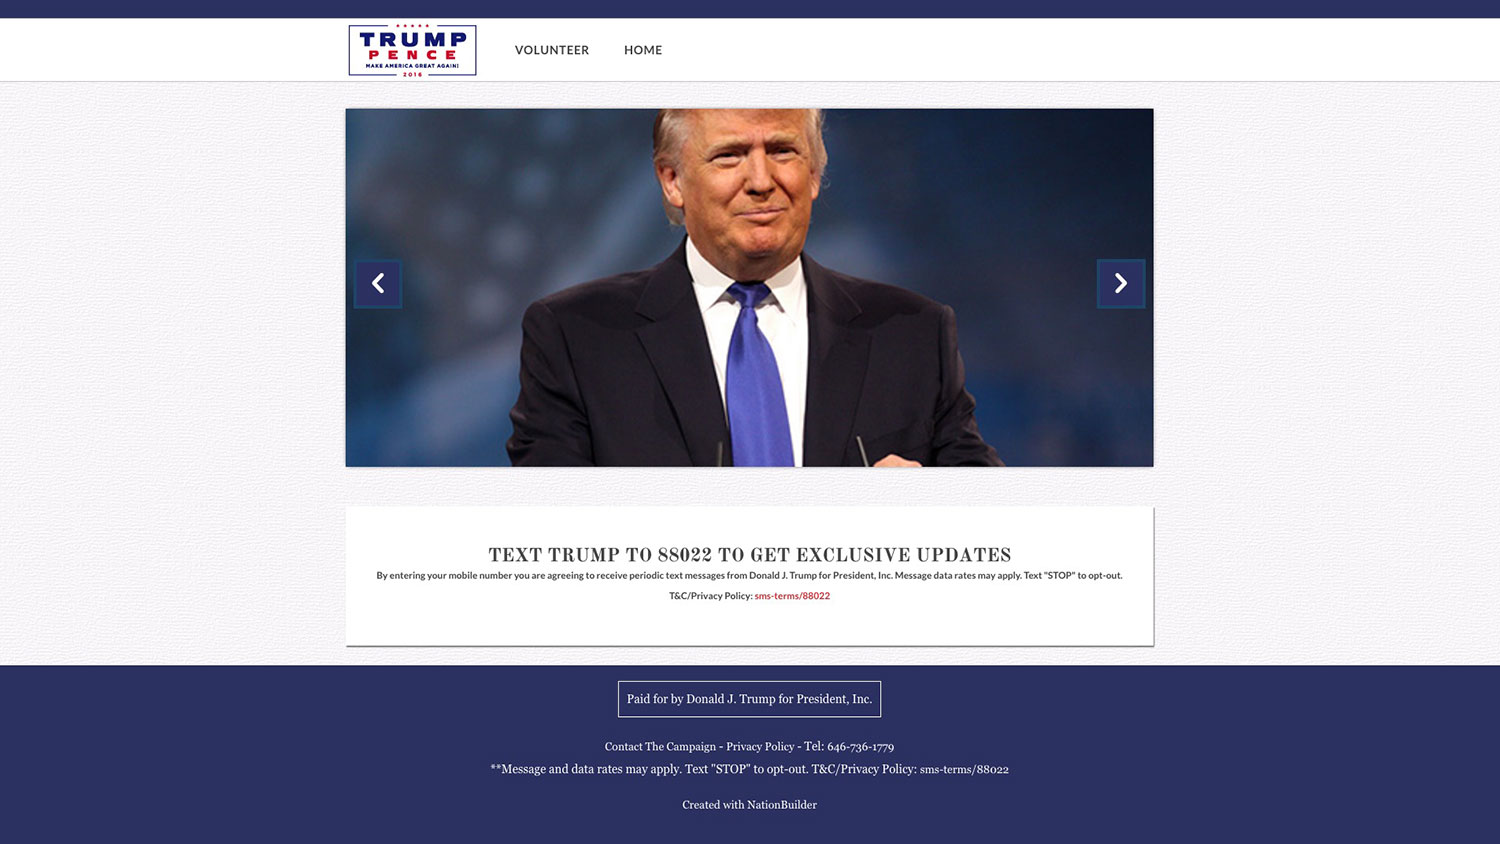 the political software used by trump and brexit campaign donaldtrump nationbuilder 001